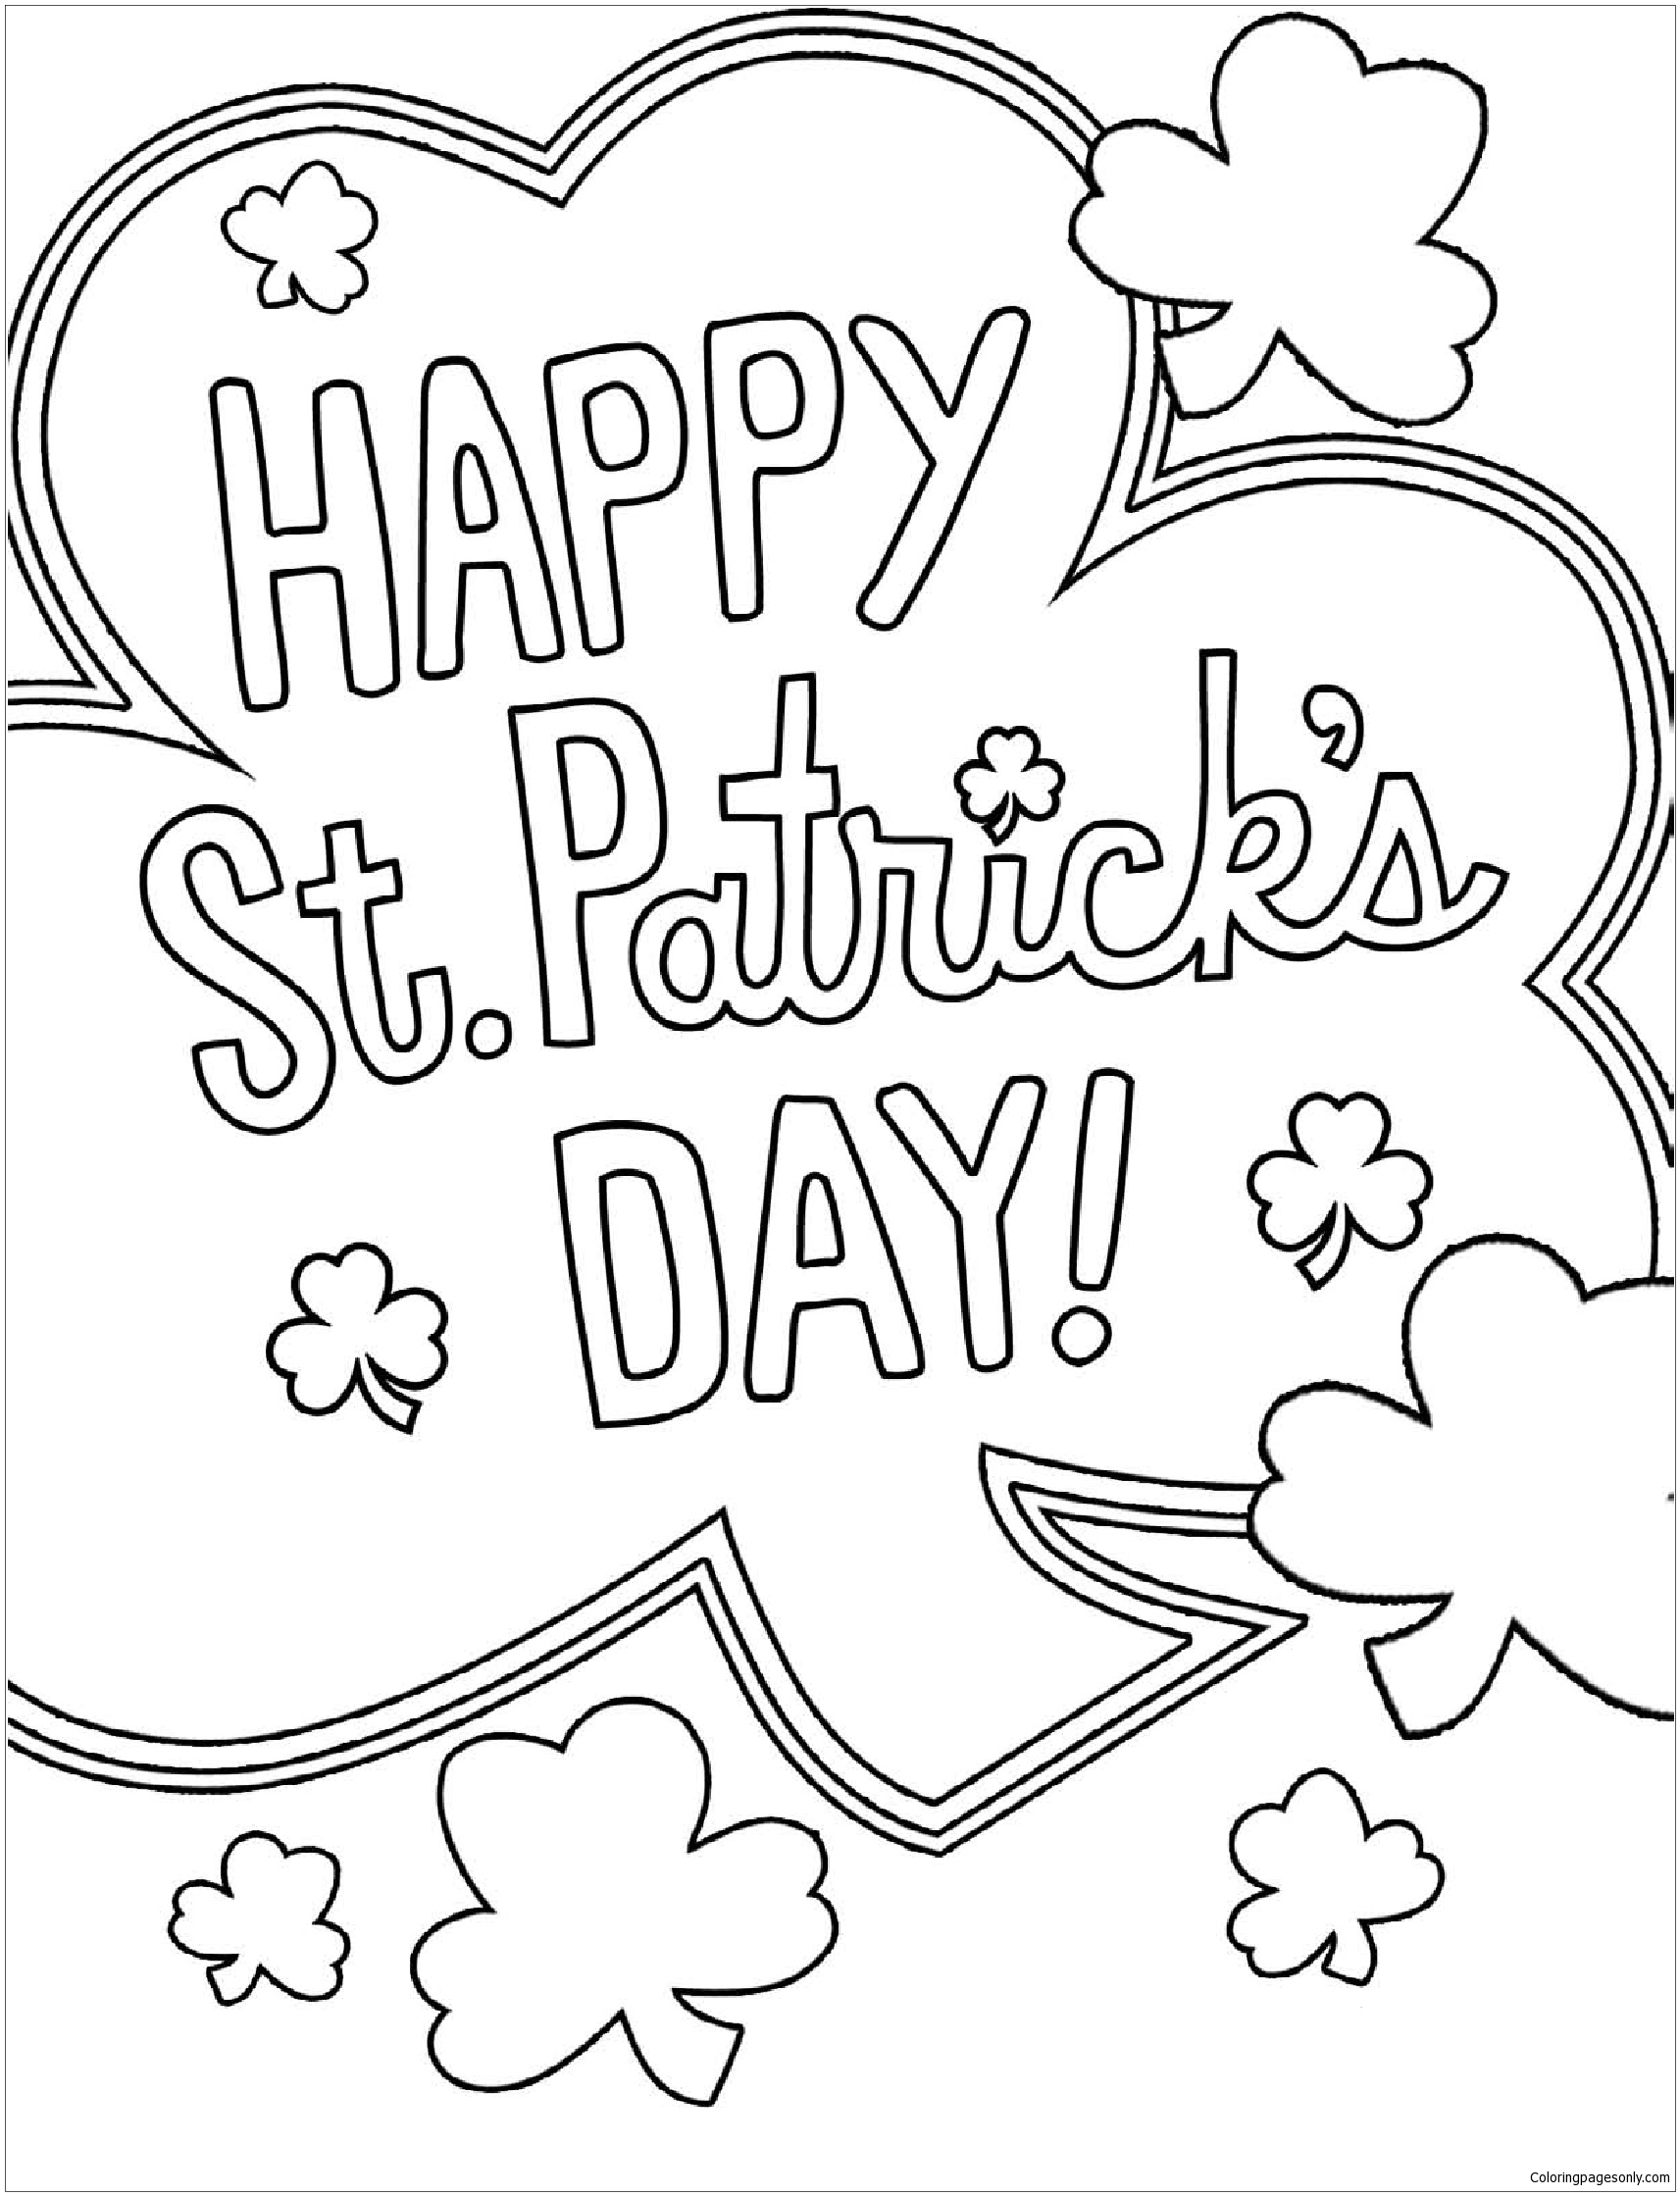 happy-st-patrick-s-day-coloring-pages-st-patricks-day-coloring